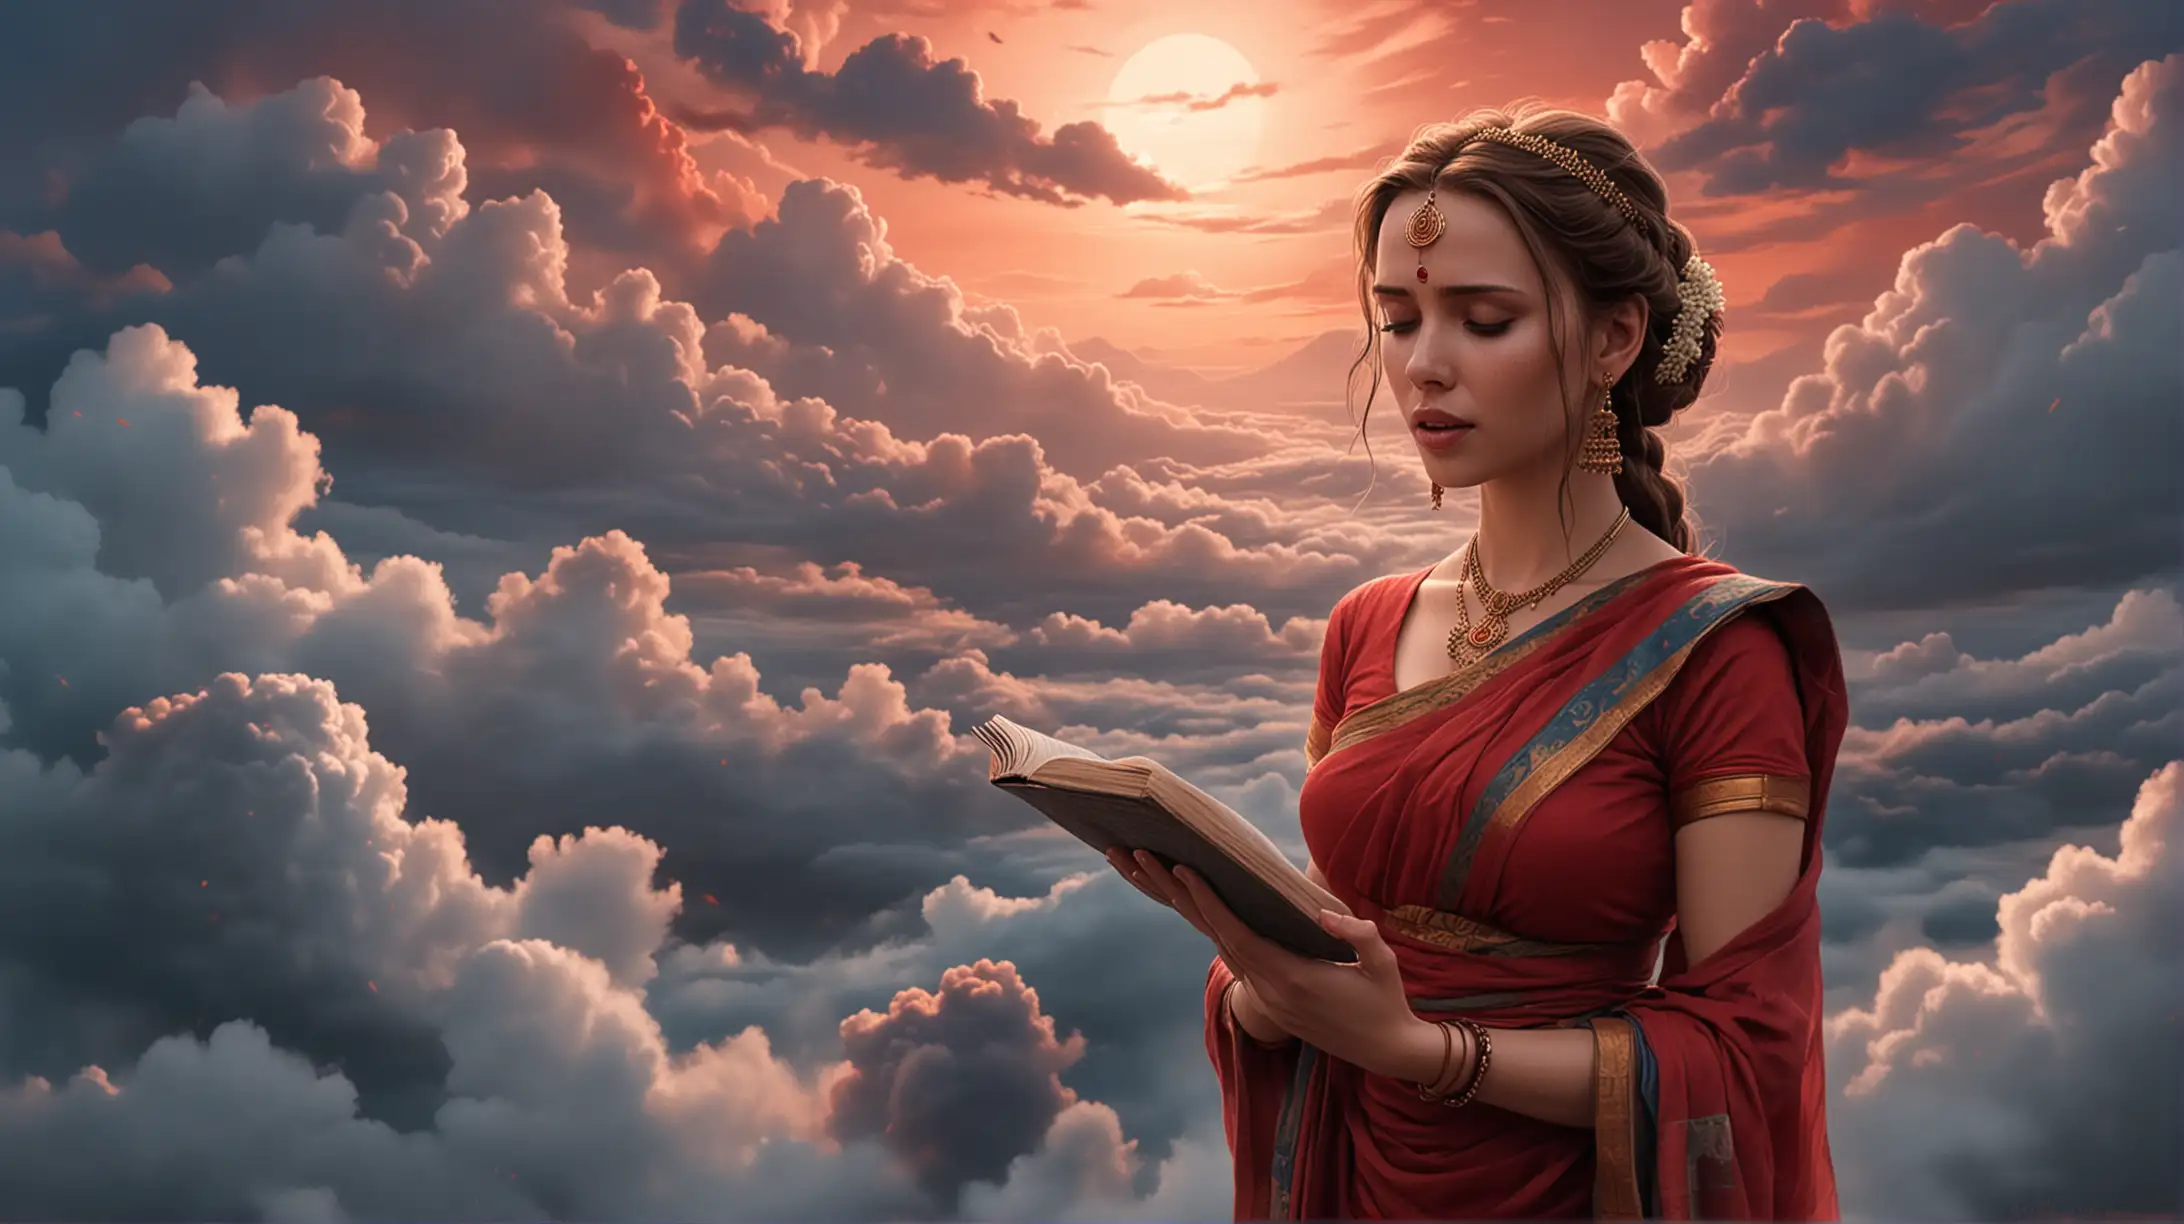 cartoon, Scarlett Johansson as indian girl reads Mantras of the Rig Veda only 5 fingers, azure dress, Tibet, fog, clouds, Red Sky, eyes closed